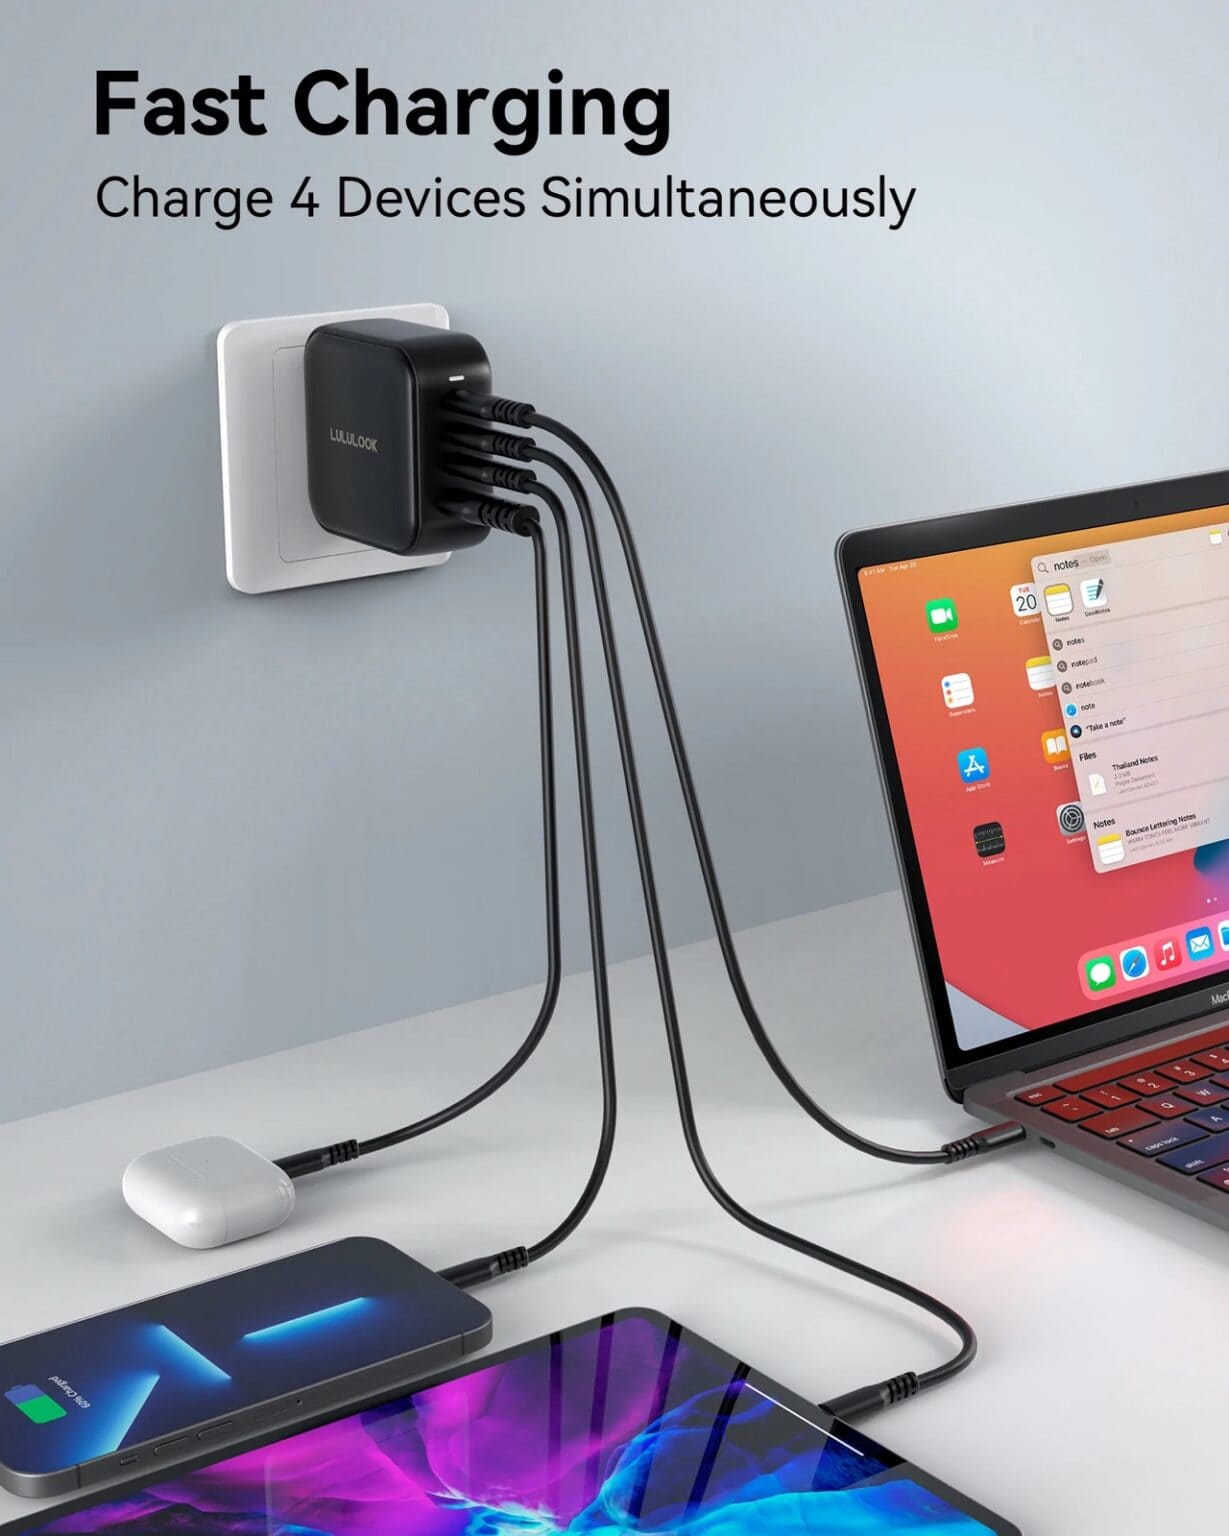 Lululook 100W GaN charger giveaway: This petite but powerful charger packs four ports so you can fast-charge all your devices simultaneously.